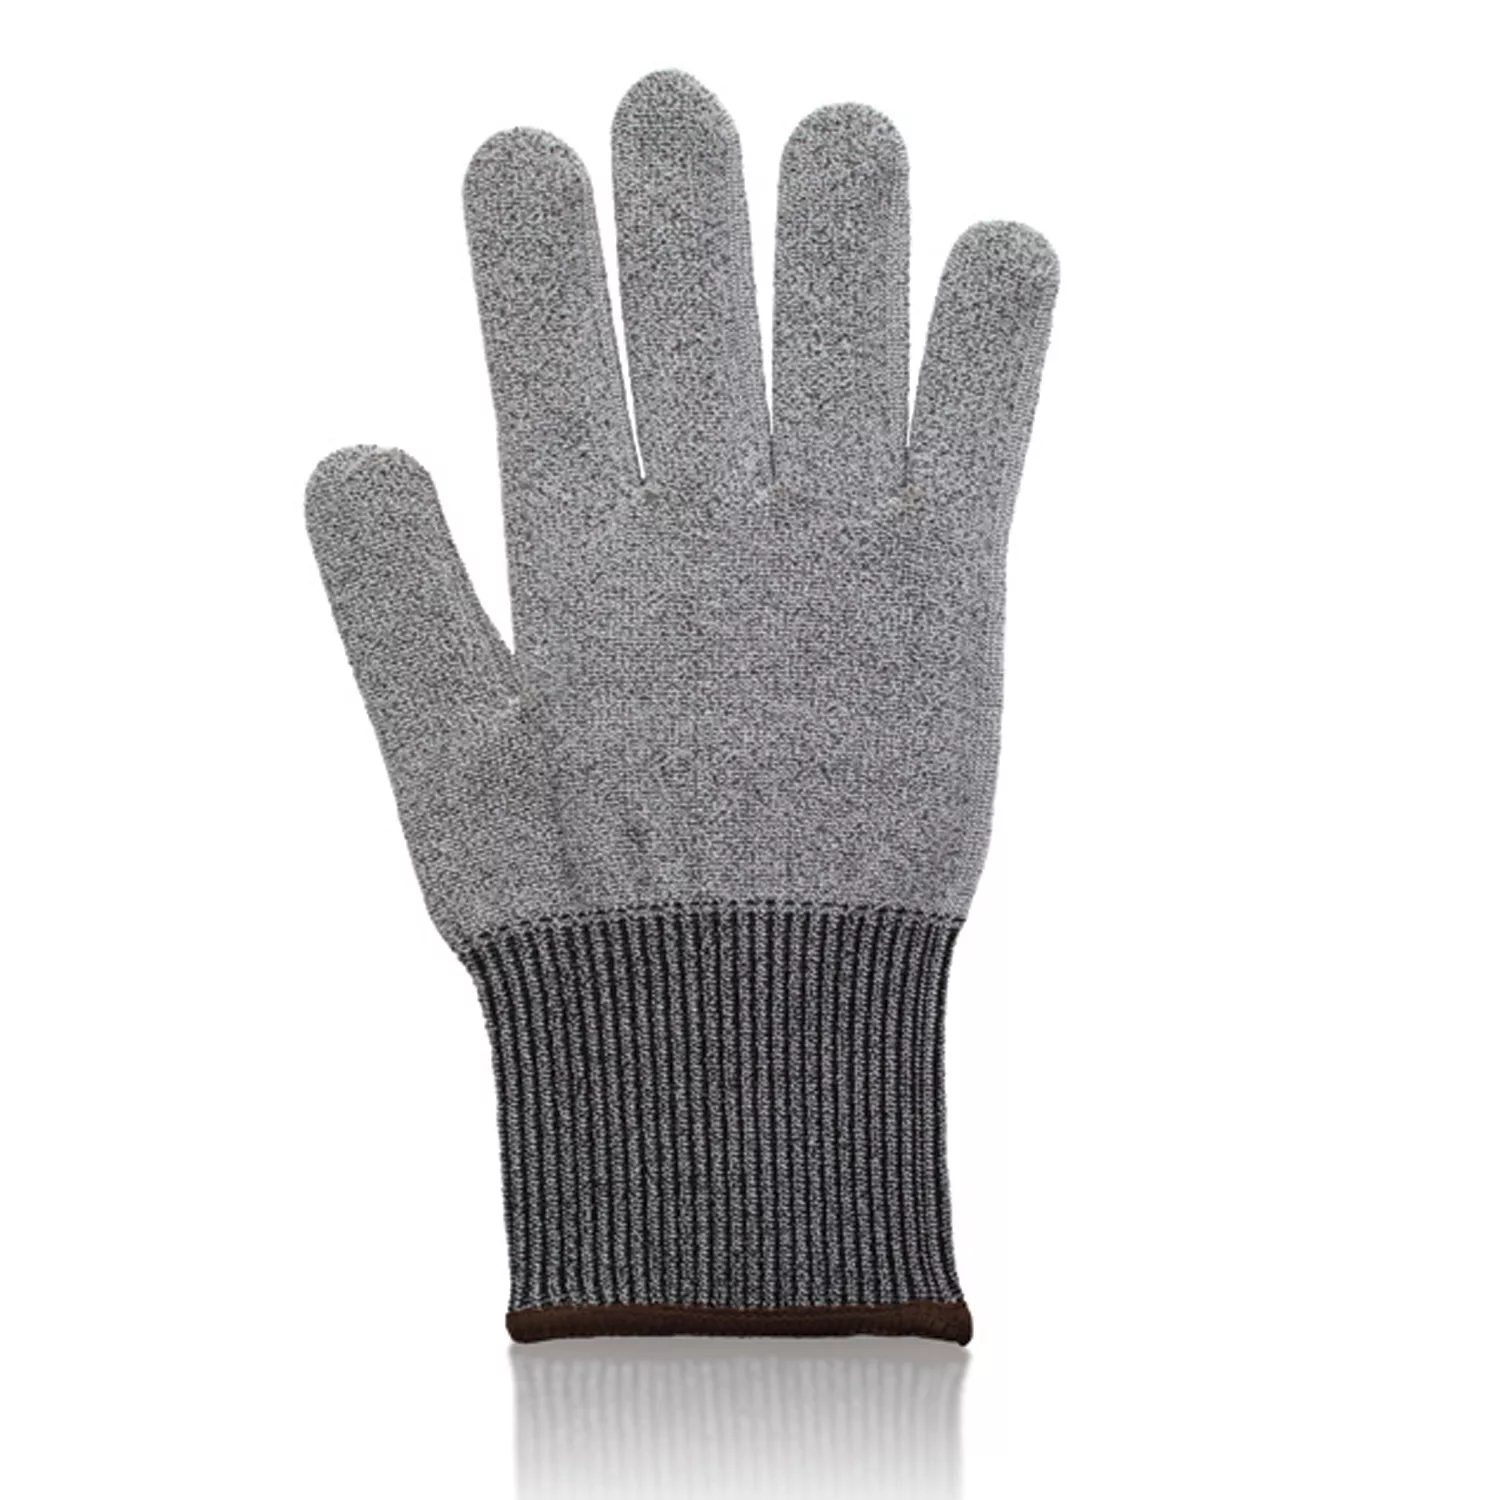 Microplane Cut Resistant Kitchen Gloves, Set of 2 on Food52